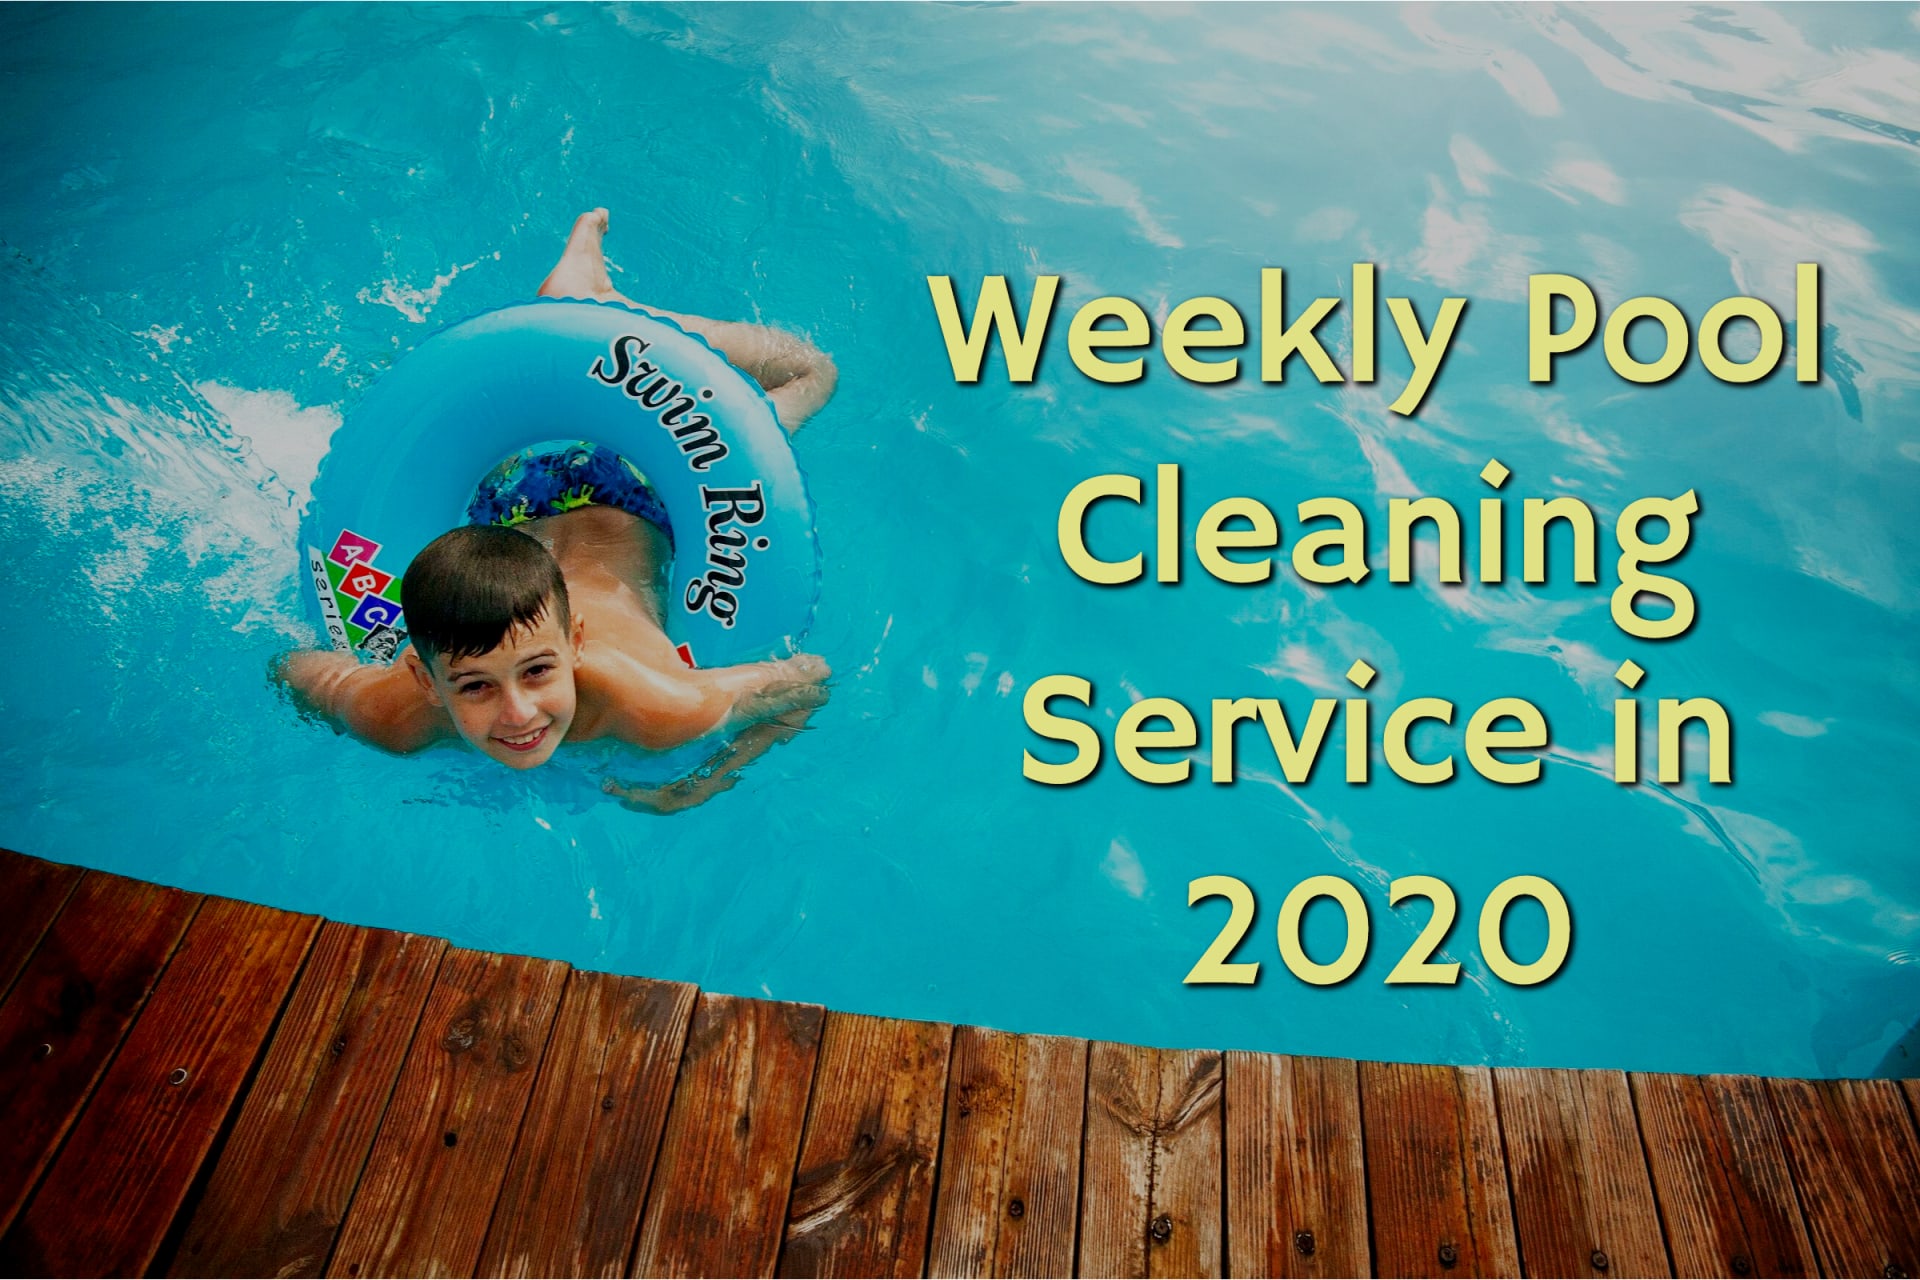 Boy swimming in a clean pool from weekly pool cleaning service